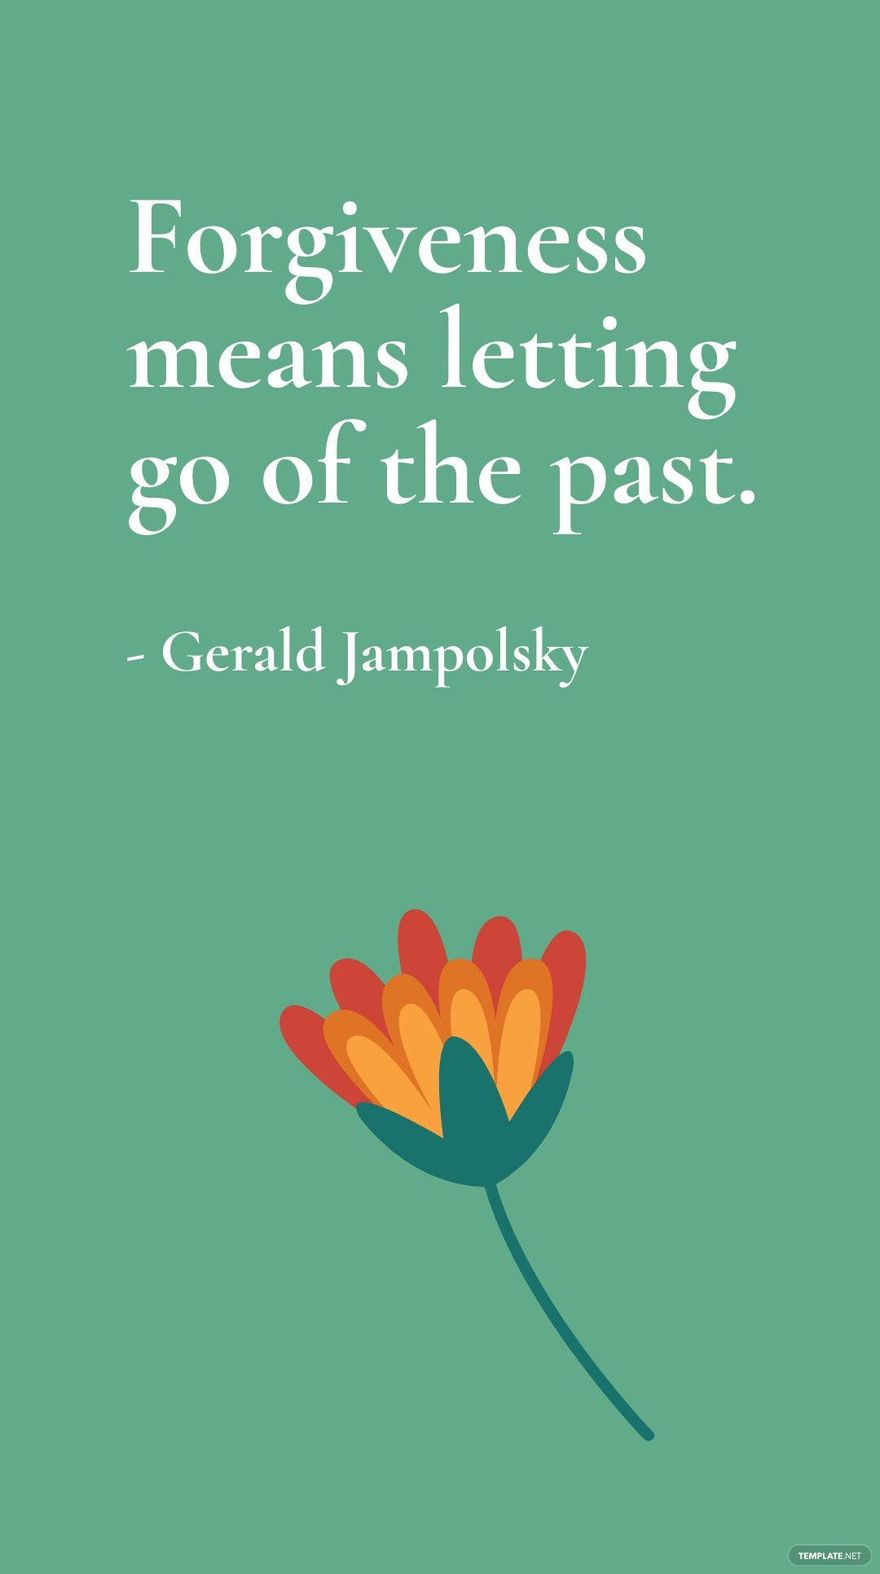 Gerald Jampolsky - Forgiveness means letting go of the past. in JPG